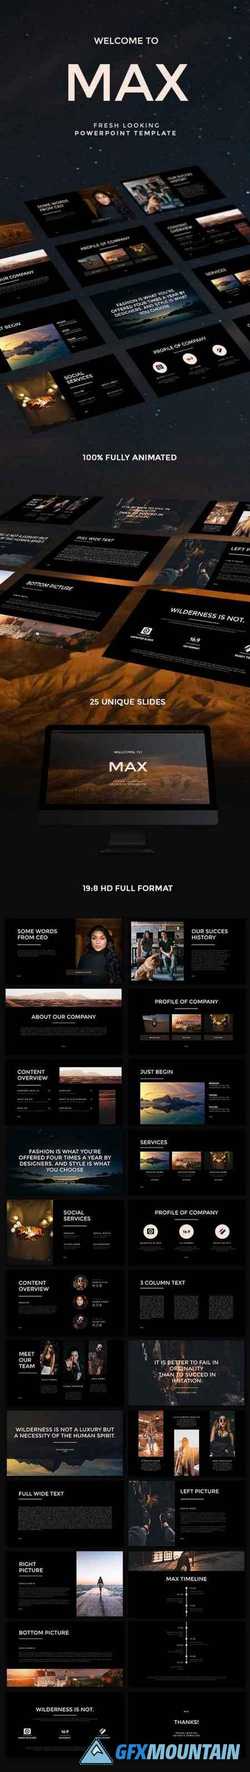 MAX Fresh Looking PowerPoint Template 22606464